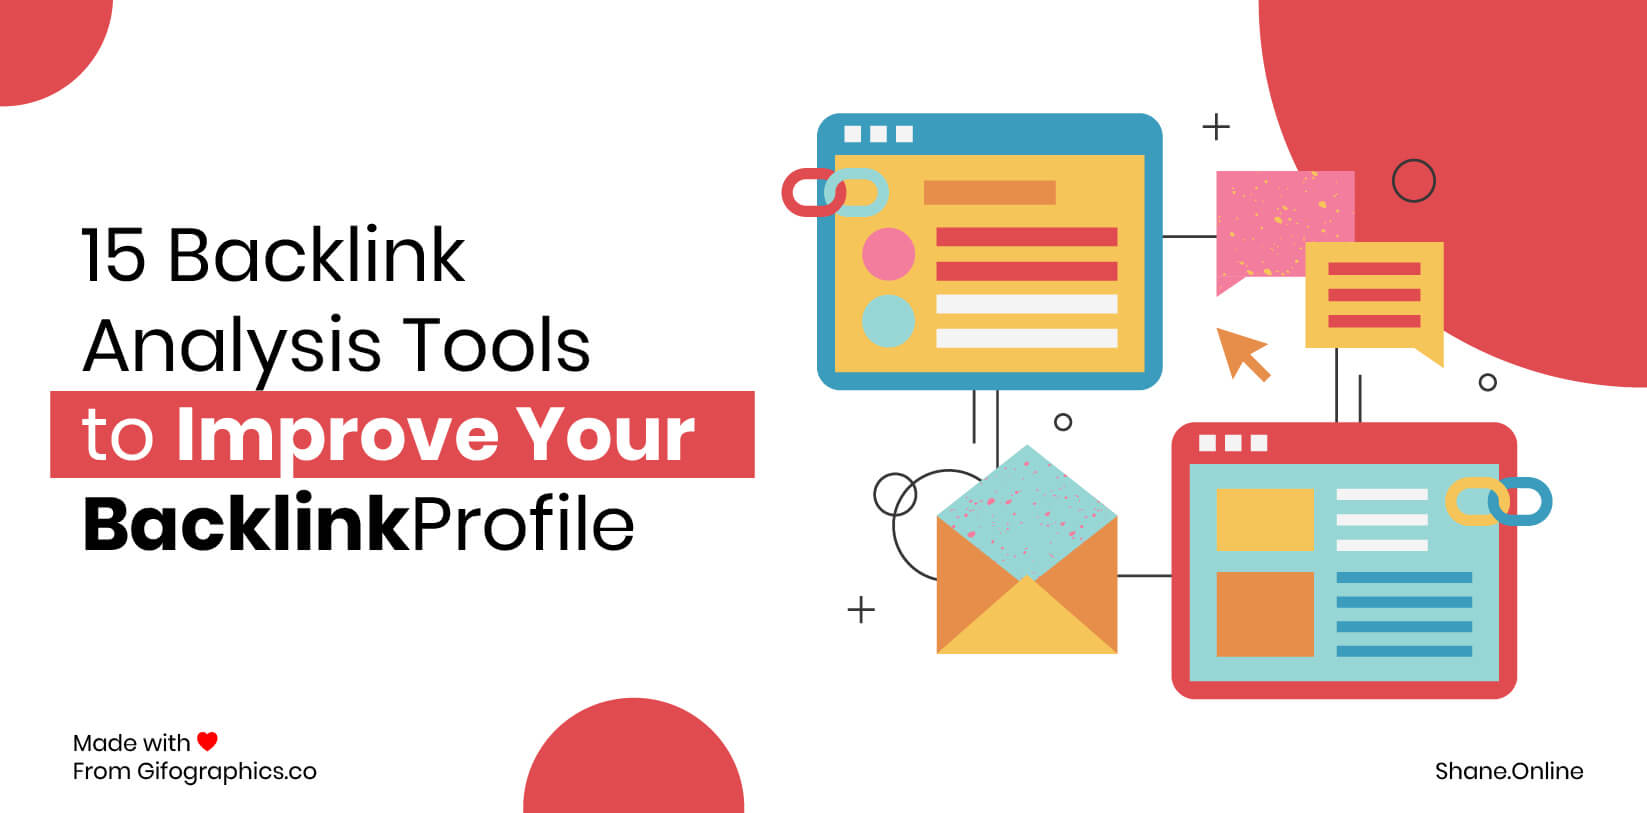 15 Backlink Analysis Tools to Improve Your Backlink Profile“decoding=